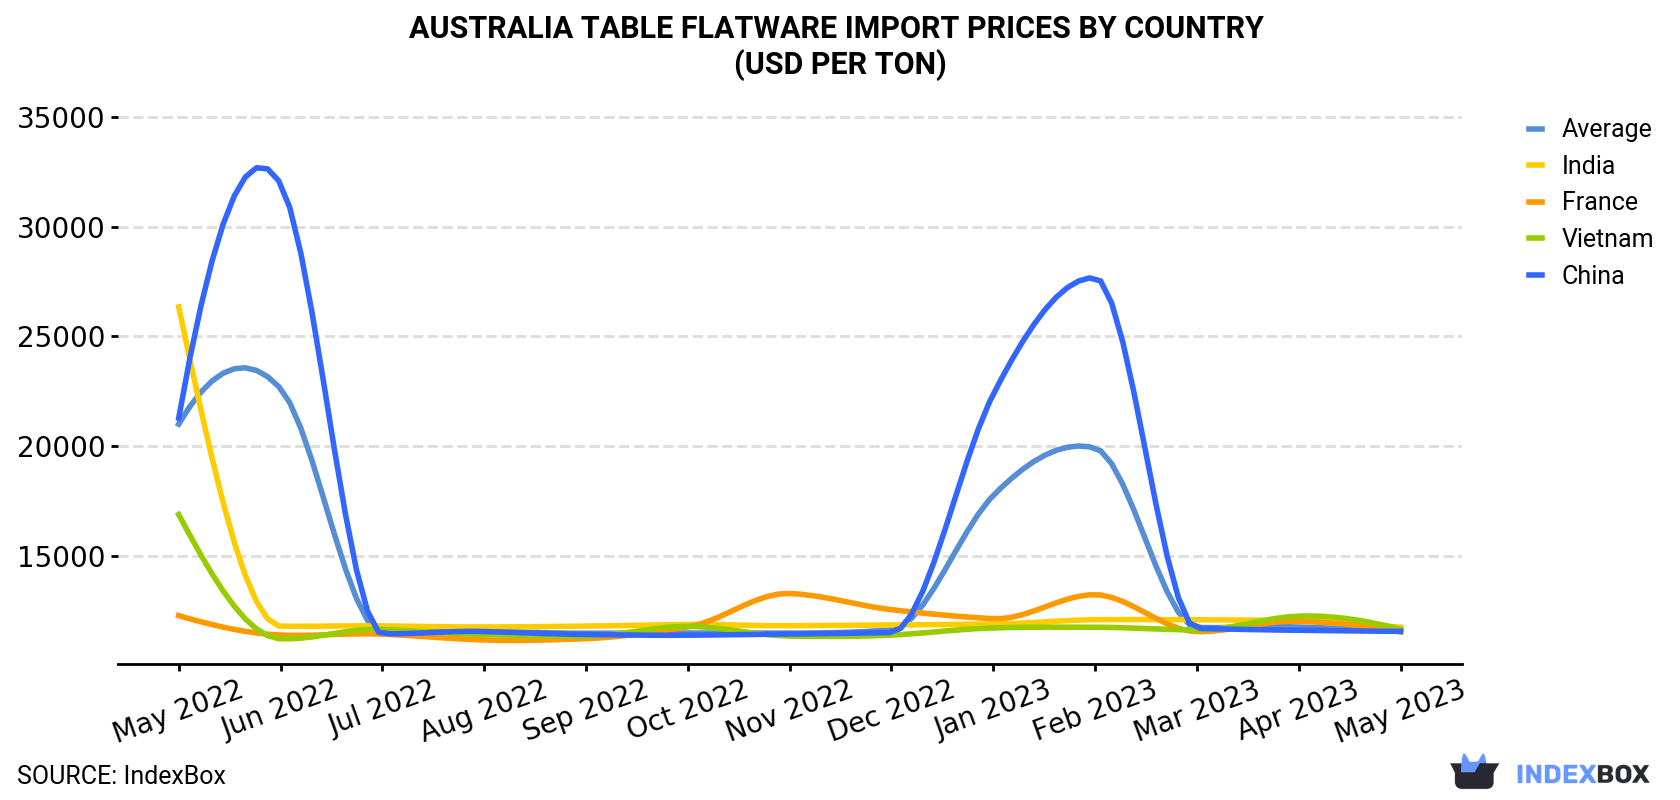 Australia Table Flatware Import Prices By Country (USD Per Ton)